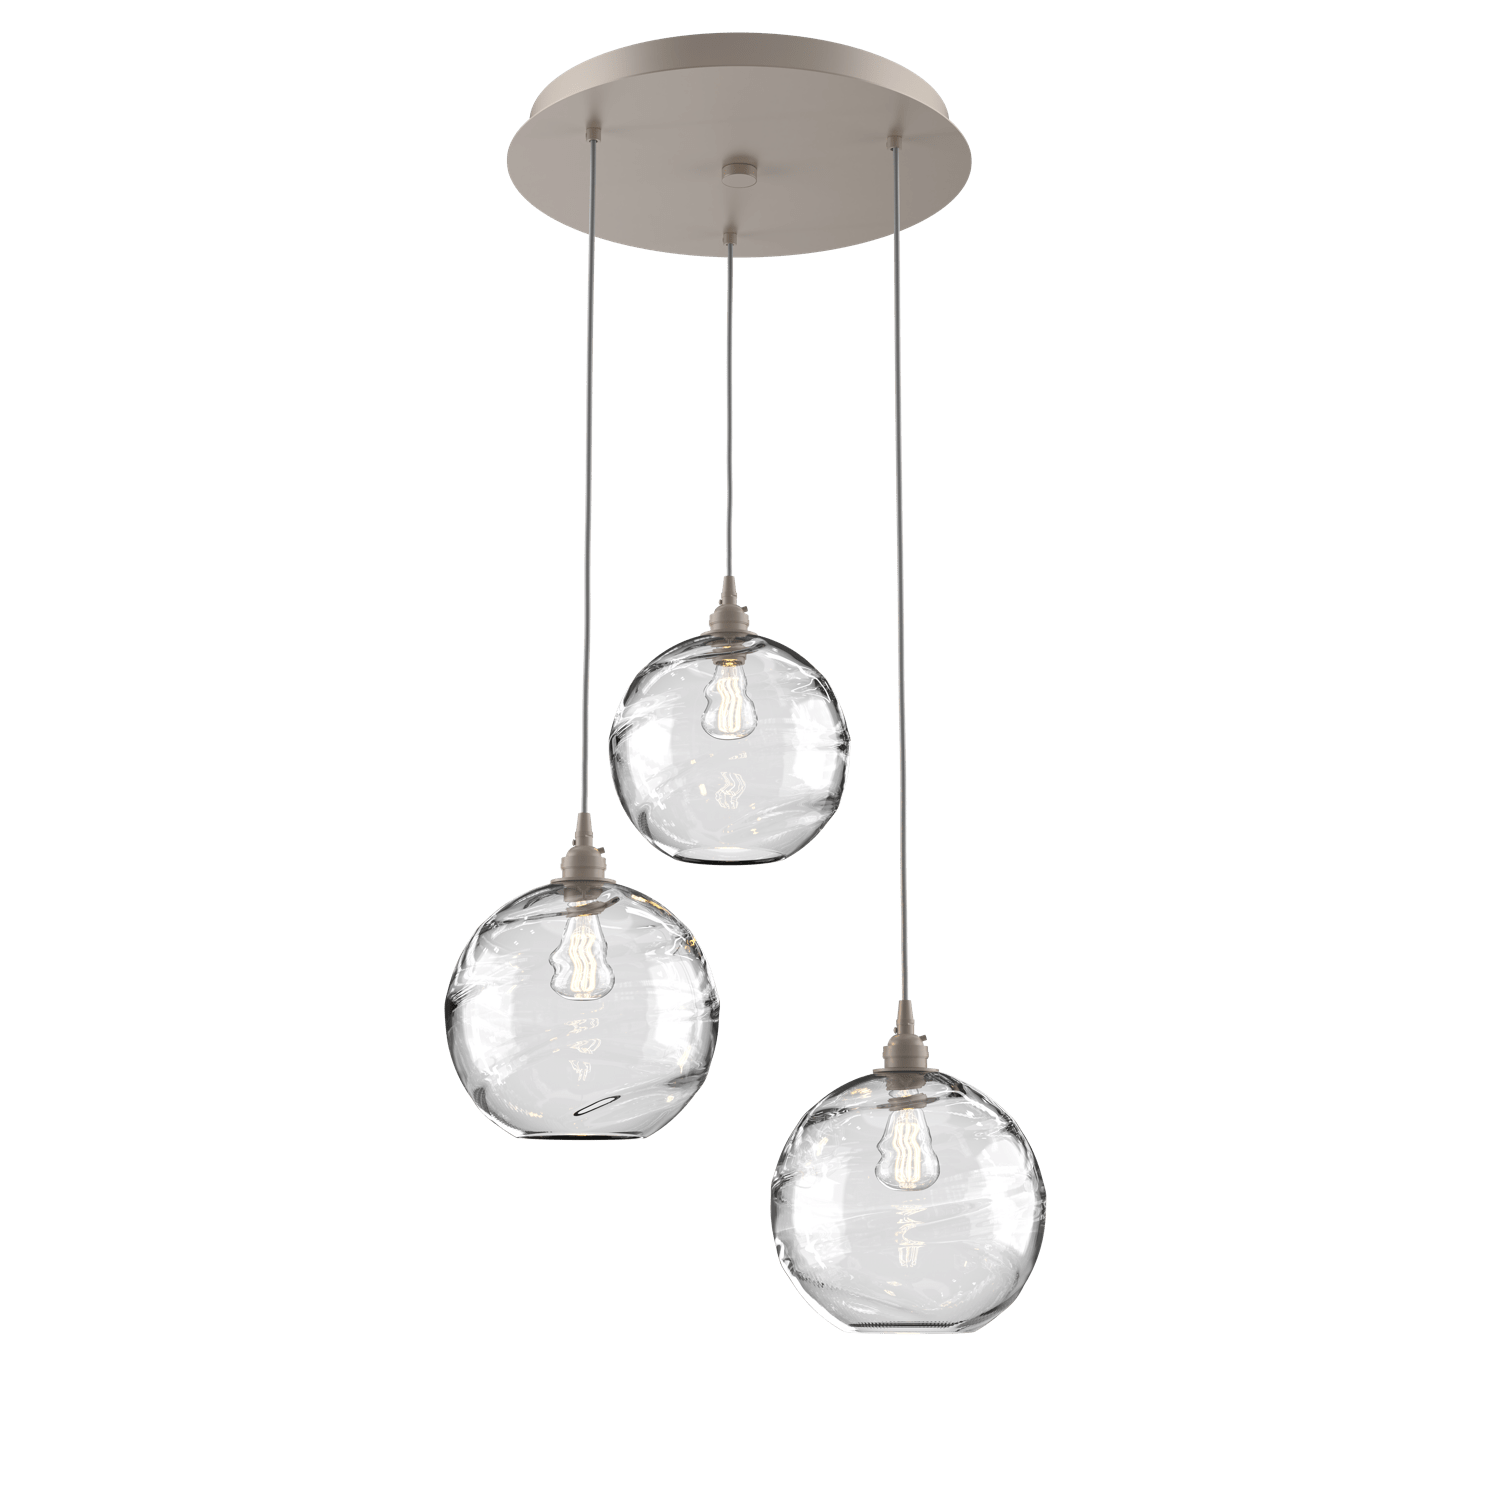 CHB0047-03-BS-OC-Hammerton-Studio-Optic-Blown-Glass-Terra-3-light-round-pendant-chandelier-with-metallic-beige-silver-finish-and-optic-clear-blown-glass-shades-and-incandescent-lamping